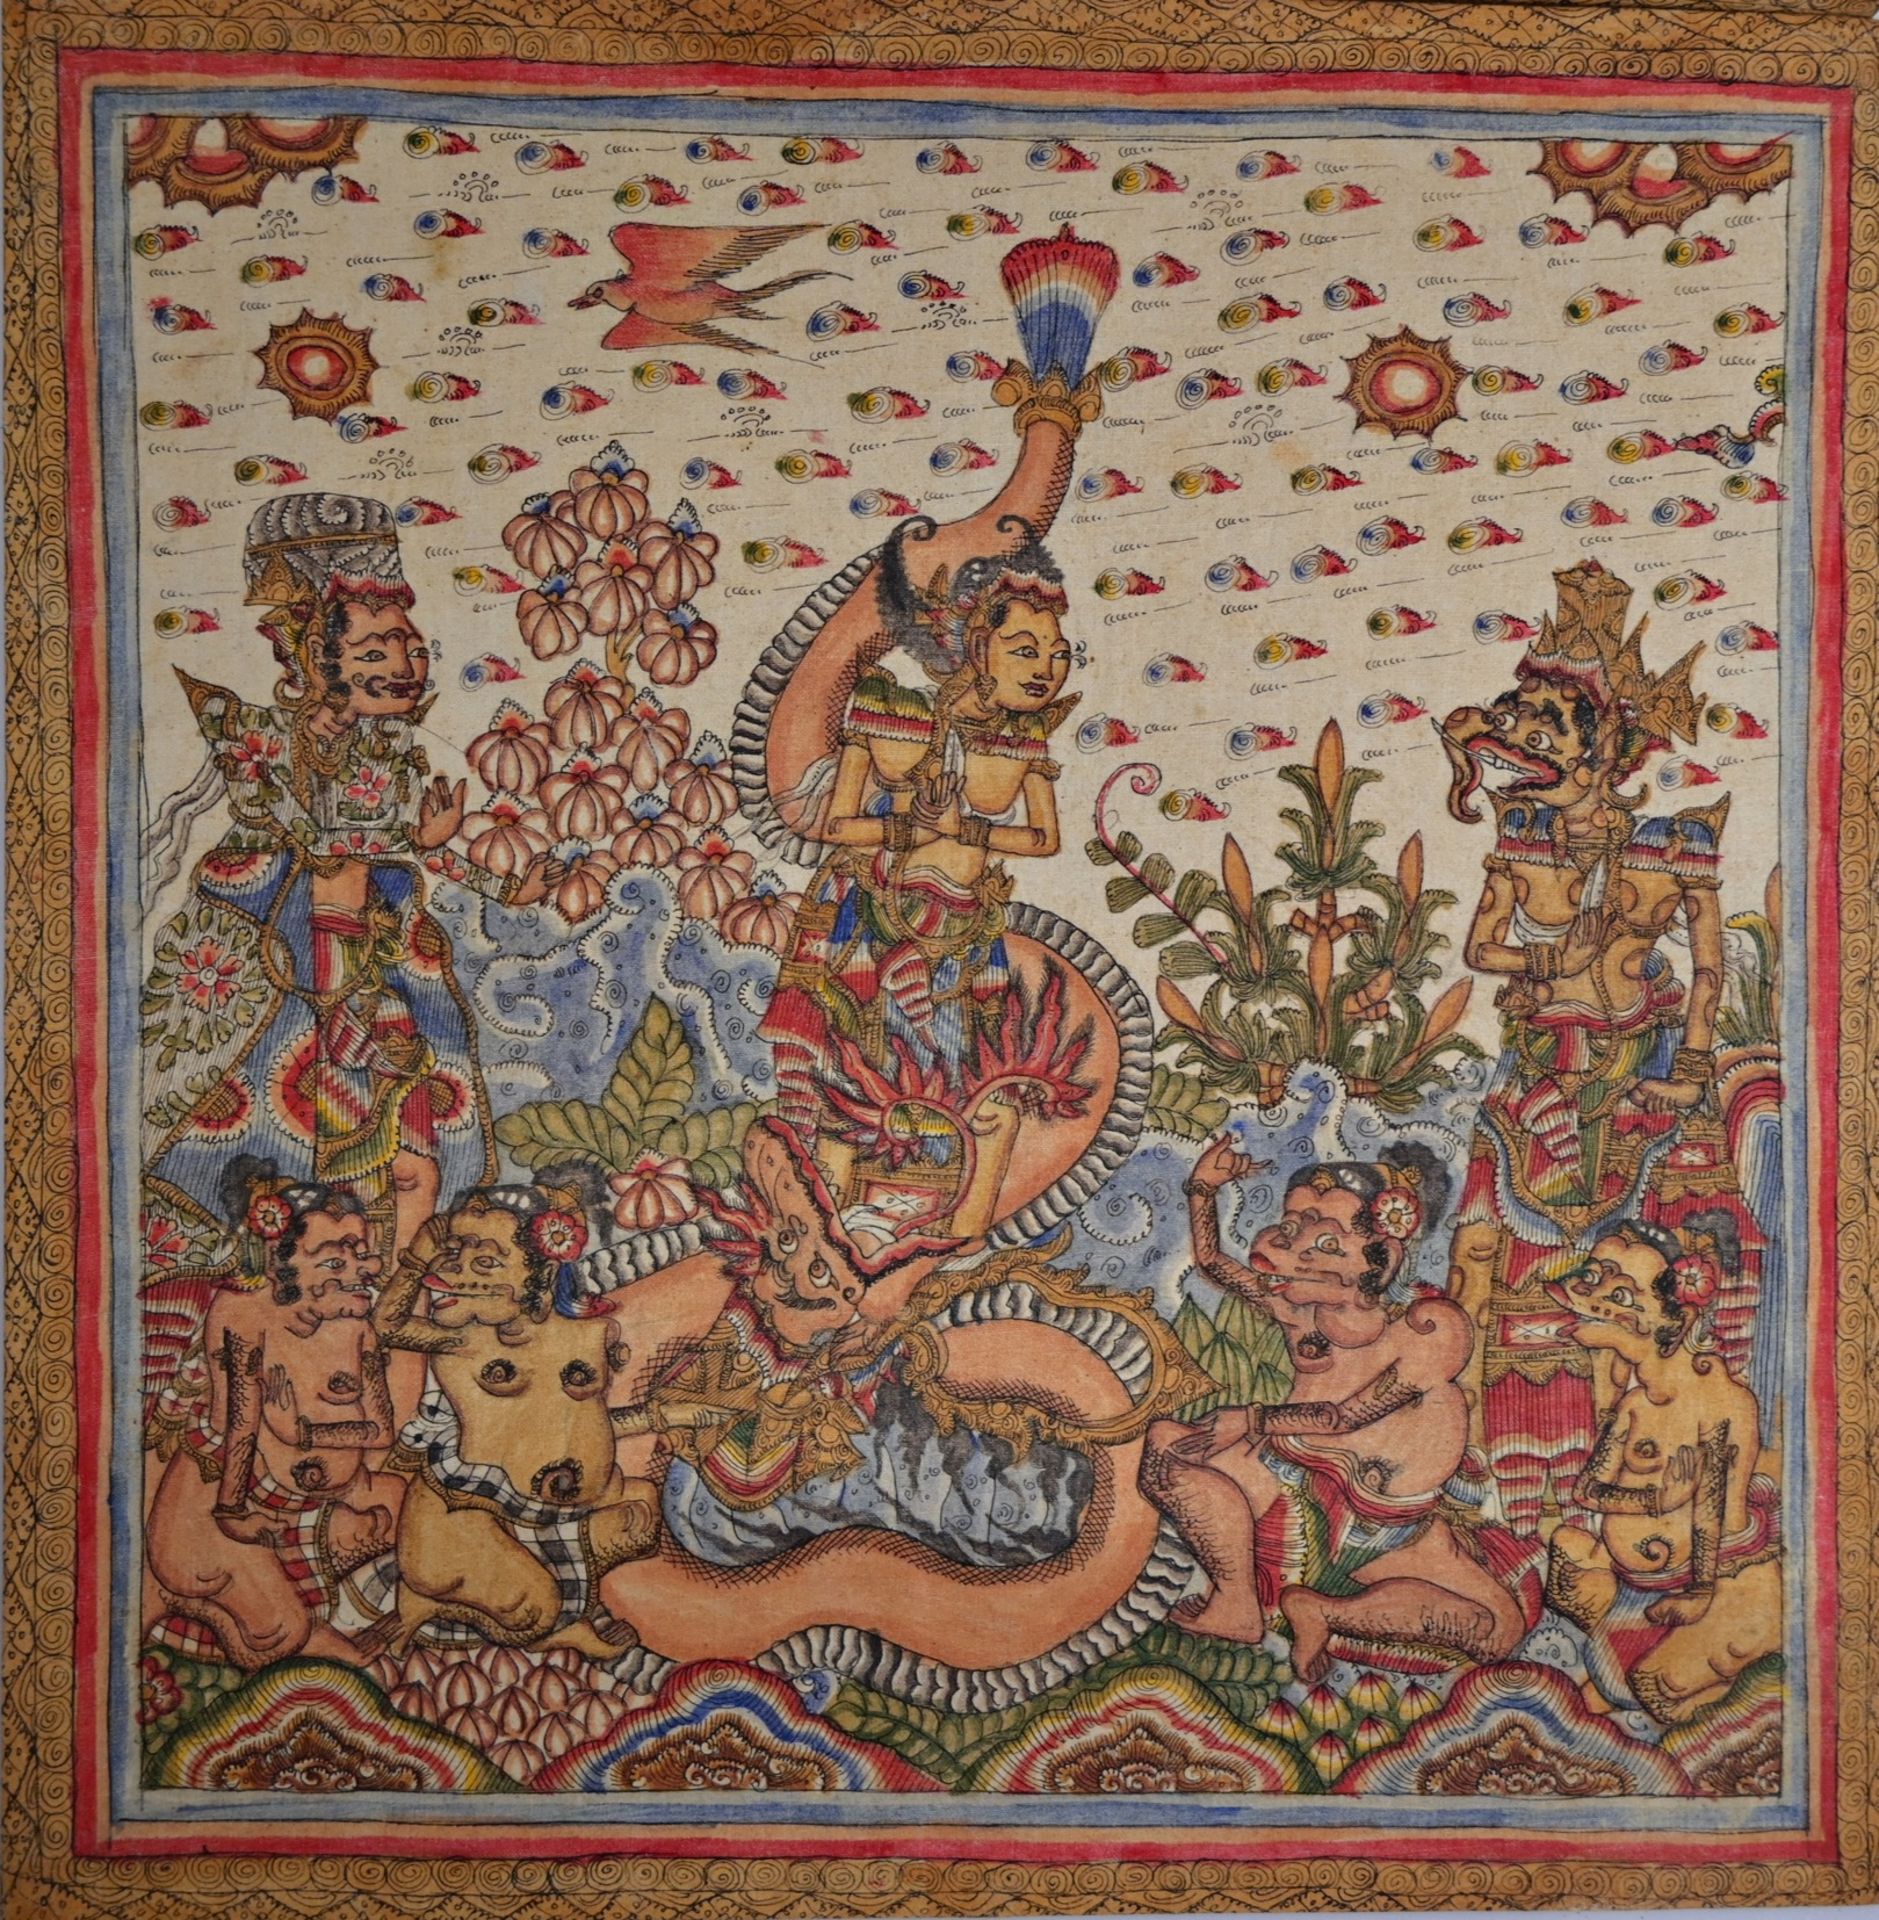 Four (4) traditional Buddhist, Indonesia, painting on fabric bound together, 20th century. - Image 2 of 6